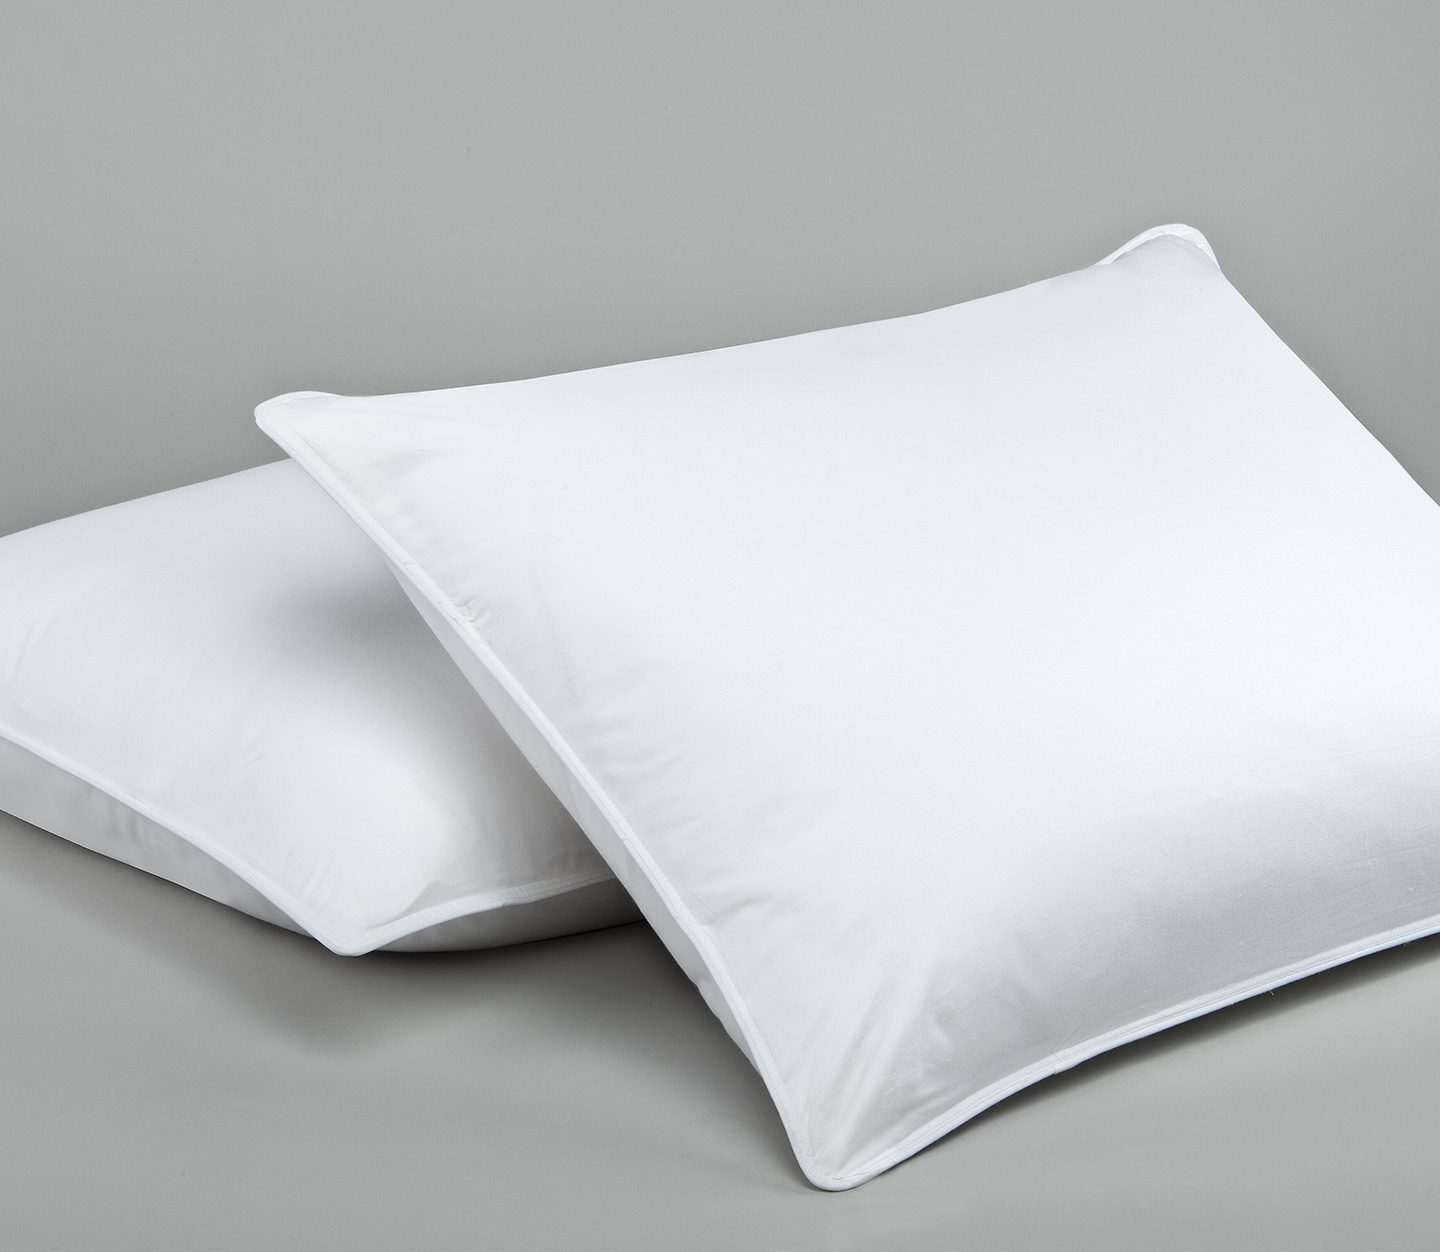 Pillow vs. Cushion: What is the Difference Between the Two?